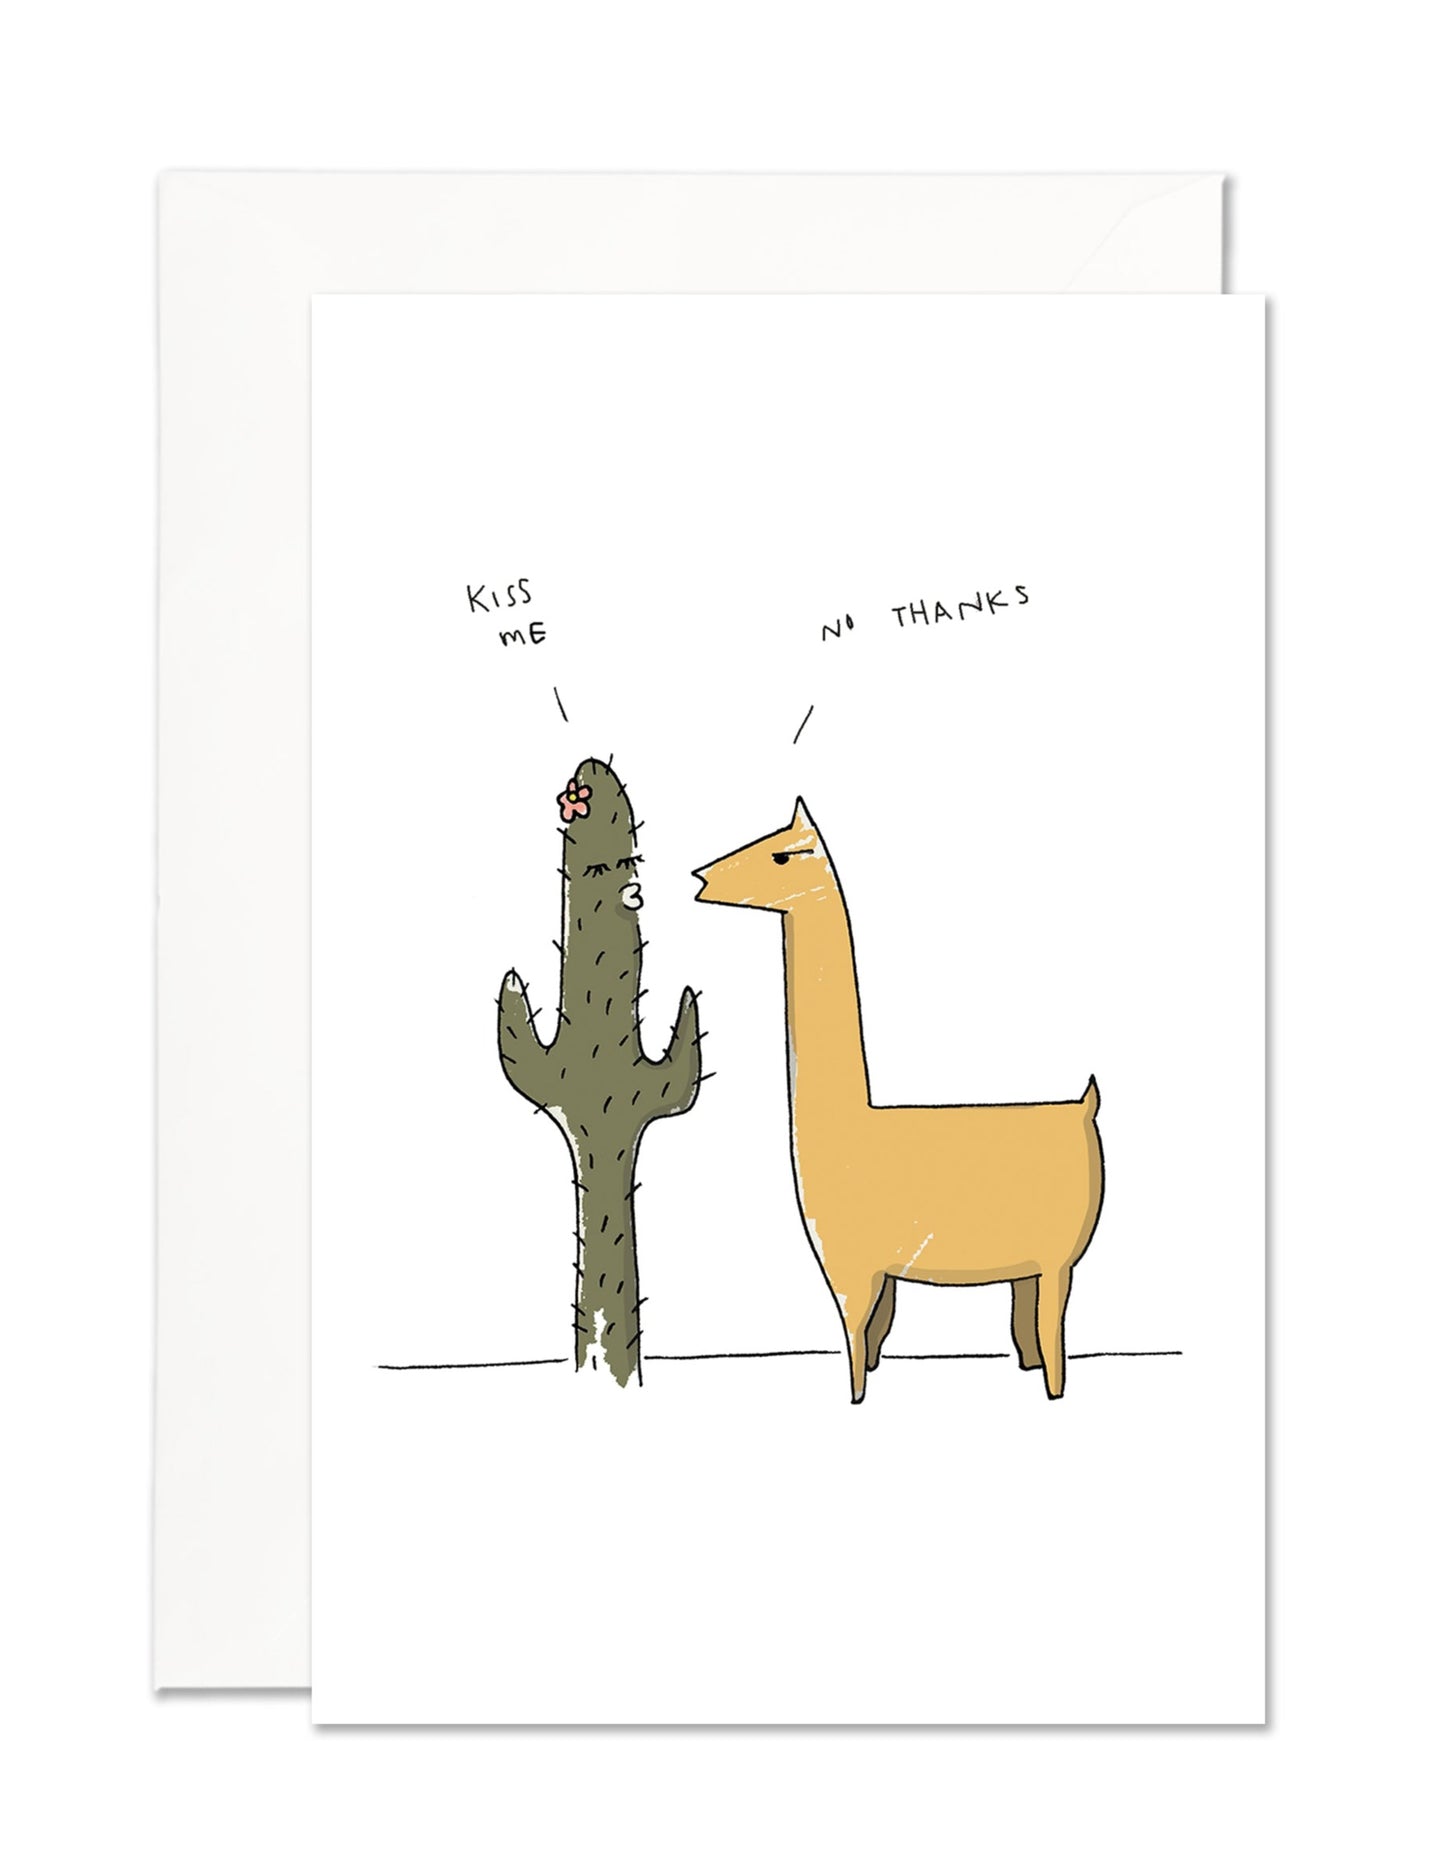 cactus and llama valentine's day card